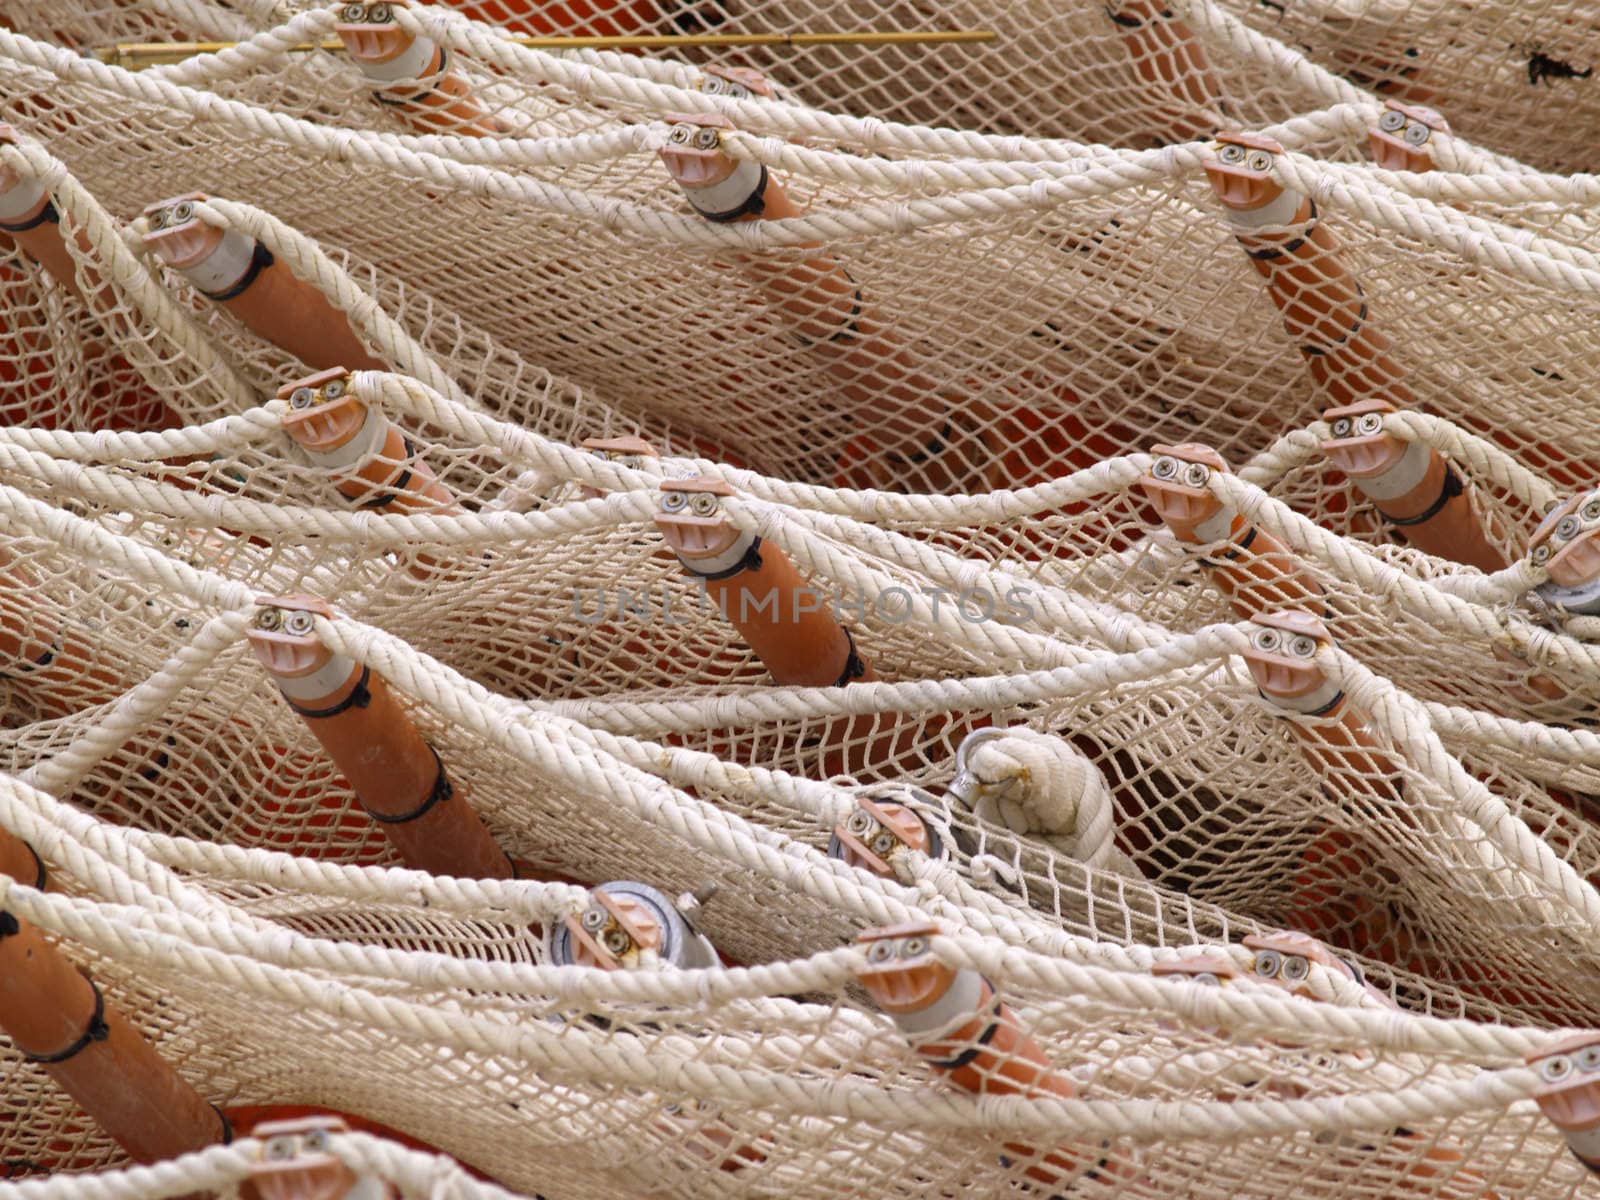 Detail of net, like it is used to keep away floating refuse from the beach